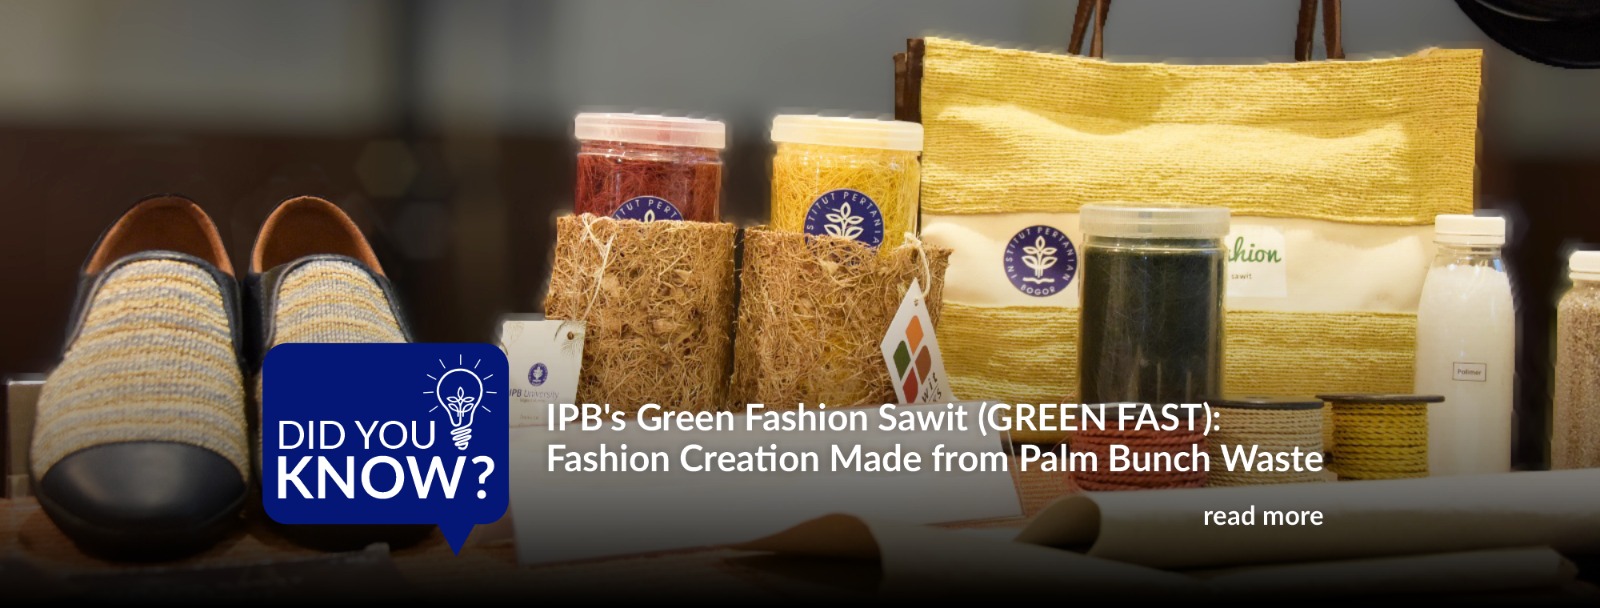 IPB's Green Fashion Sawit (GREEN FAST): Fashion Creation Made from Palm Bunch Waste